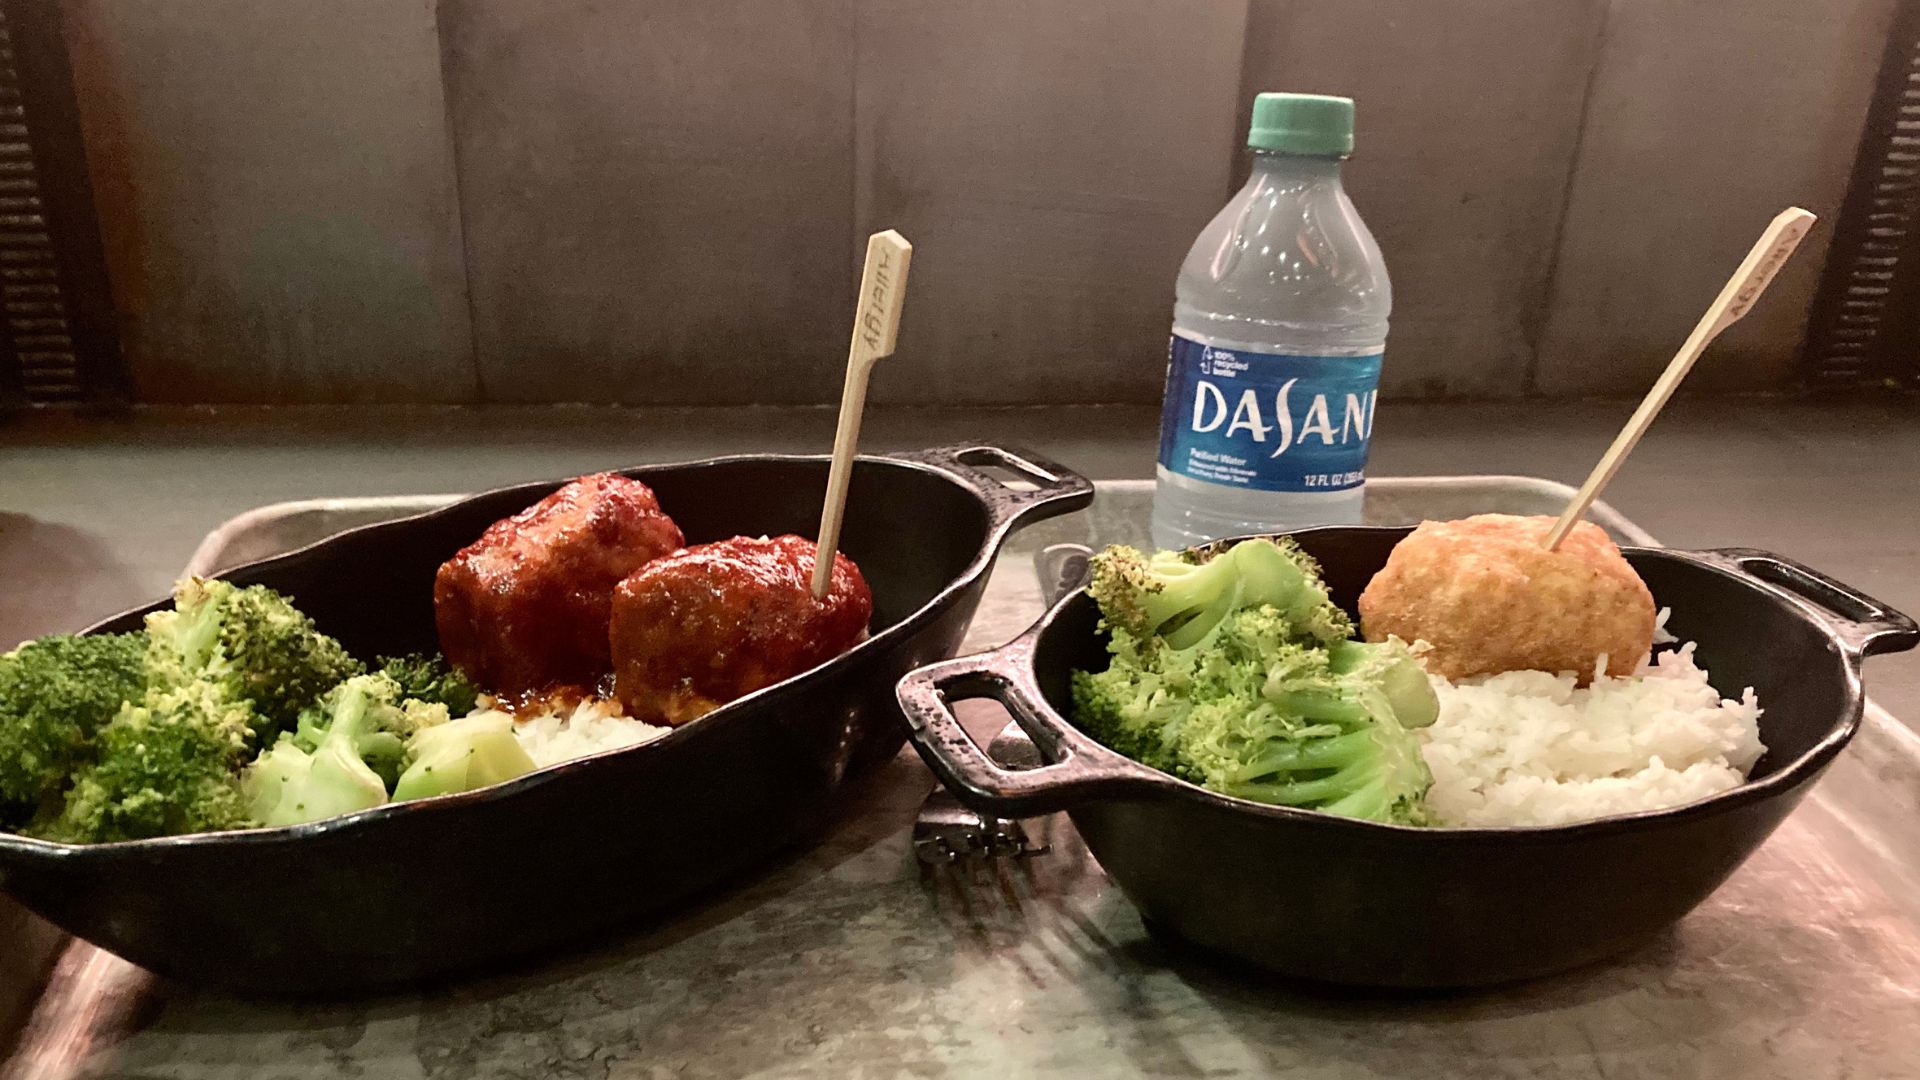 Dairy-free and gluten-free food at Hollywood Studios at Docking Bay 7, flavored chicken meatballs, rice, and broccoli and a kids meal